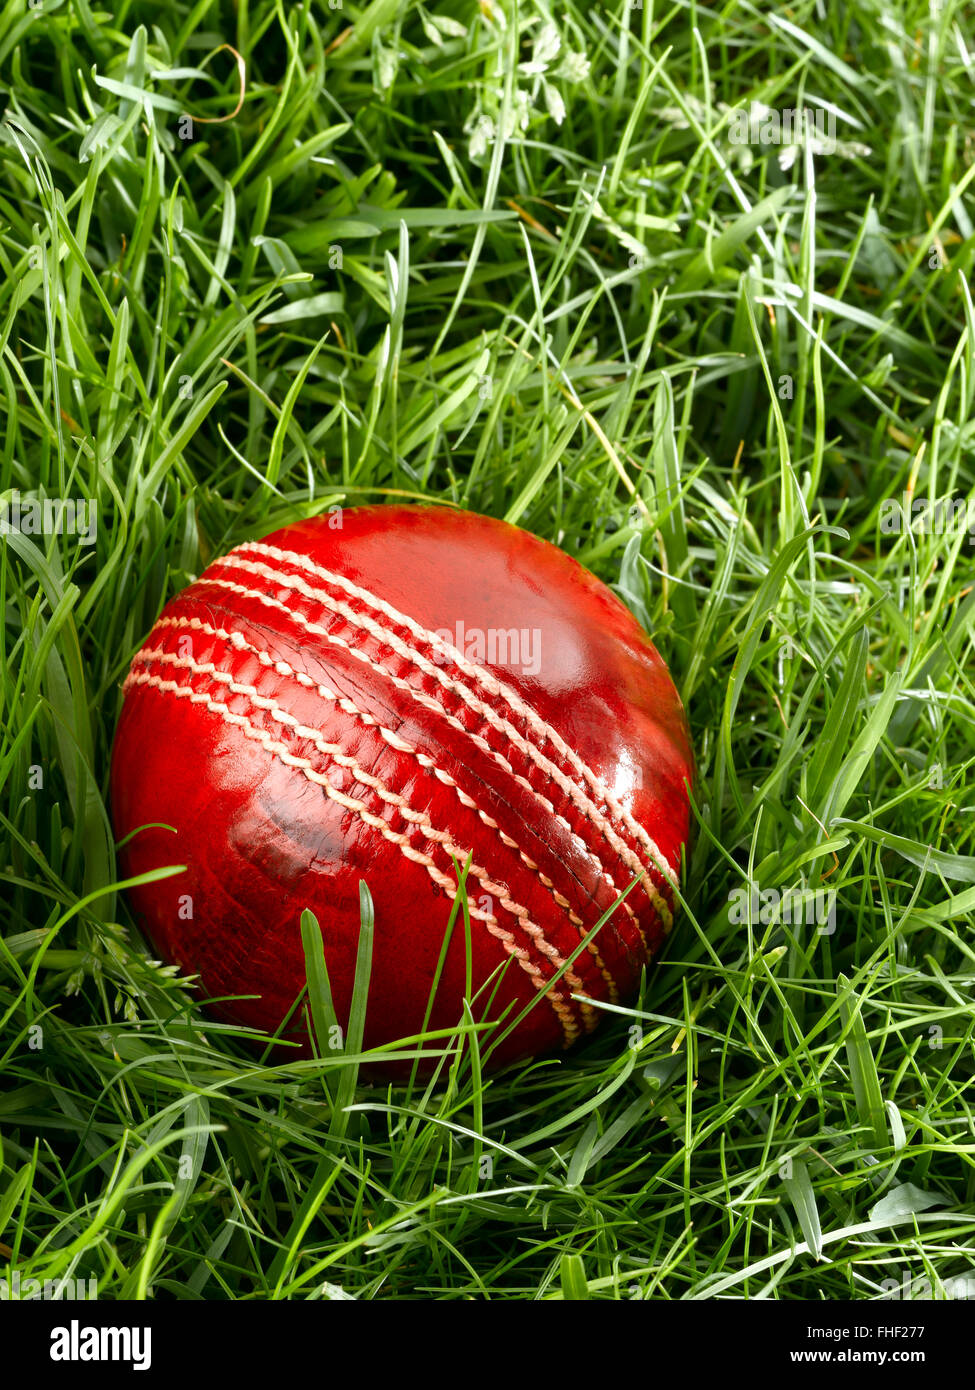 Red Leather Cricket Ball Stock Photo